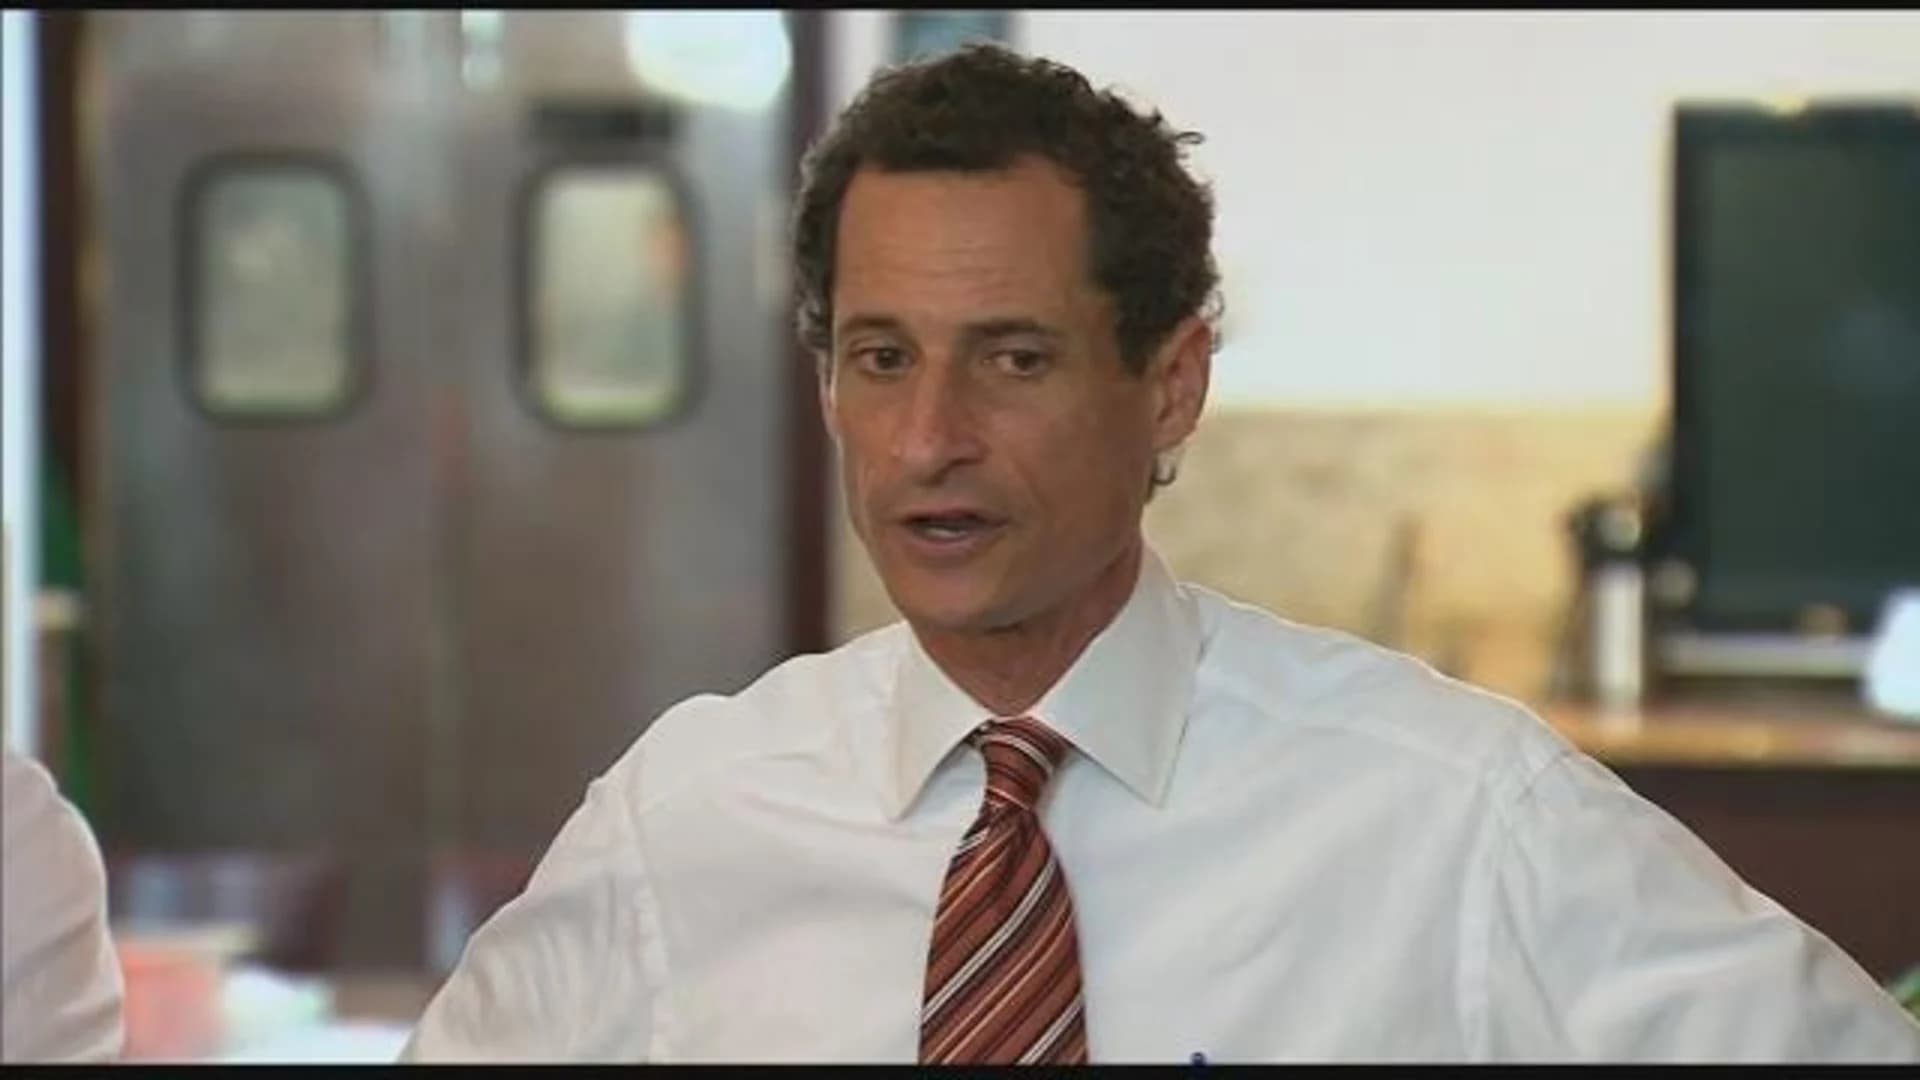 Bronx judge orders Anthony Weiner to register as level 1 sex offender